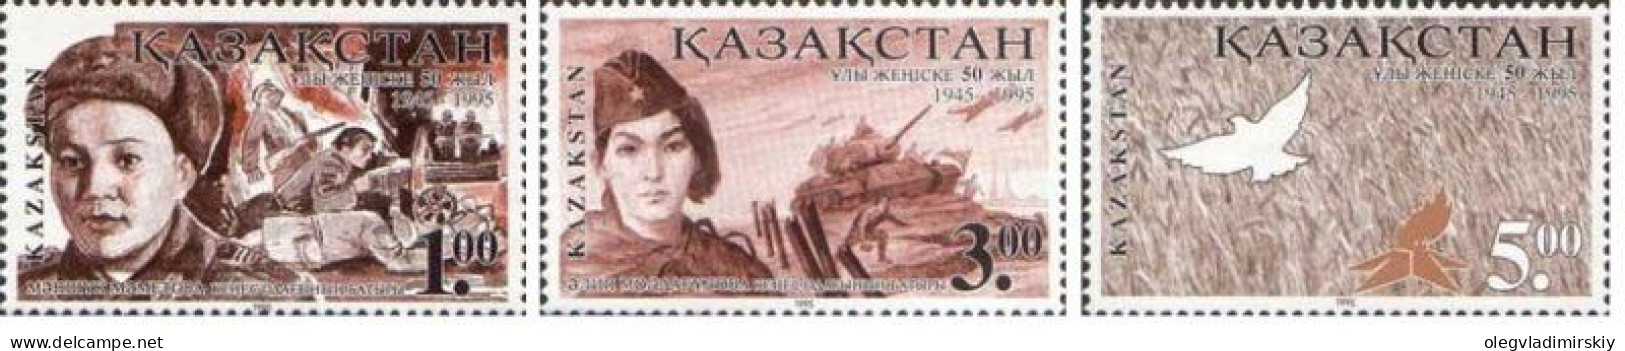 Kazakhstan 1995 50th Anniversary Of End Of WWII Set Of 3 Stamps MNH - Kazajstán